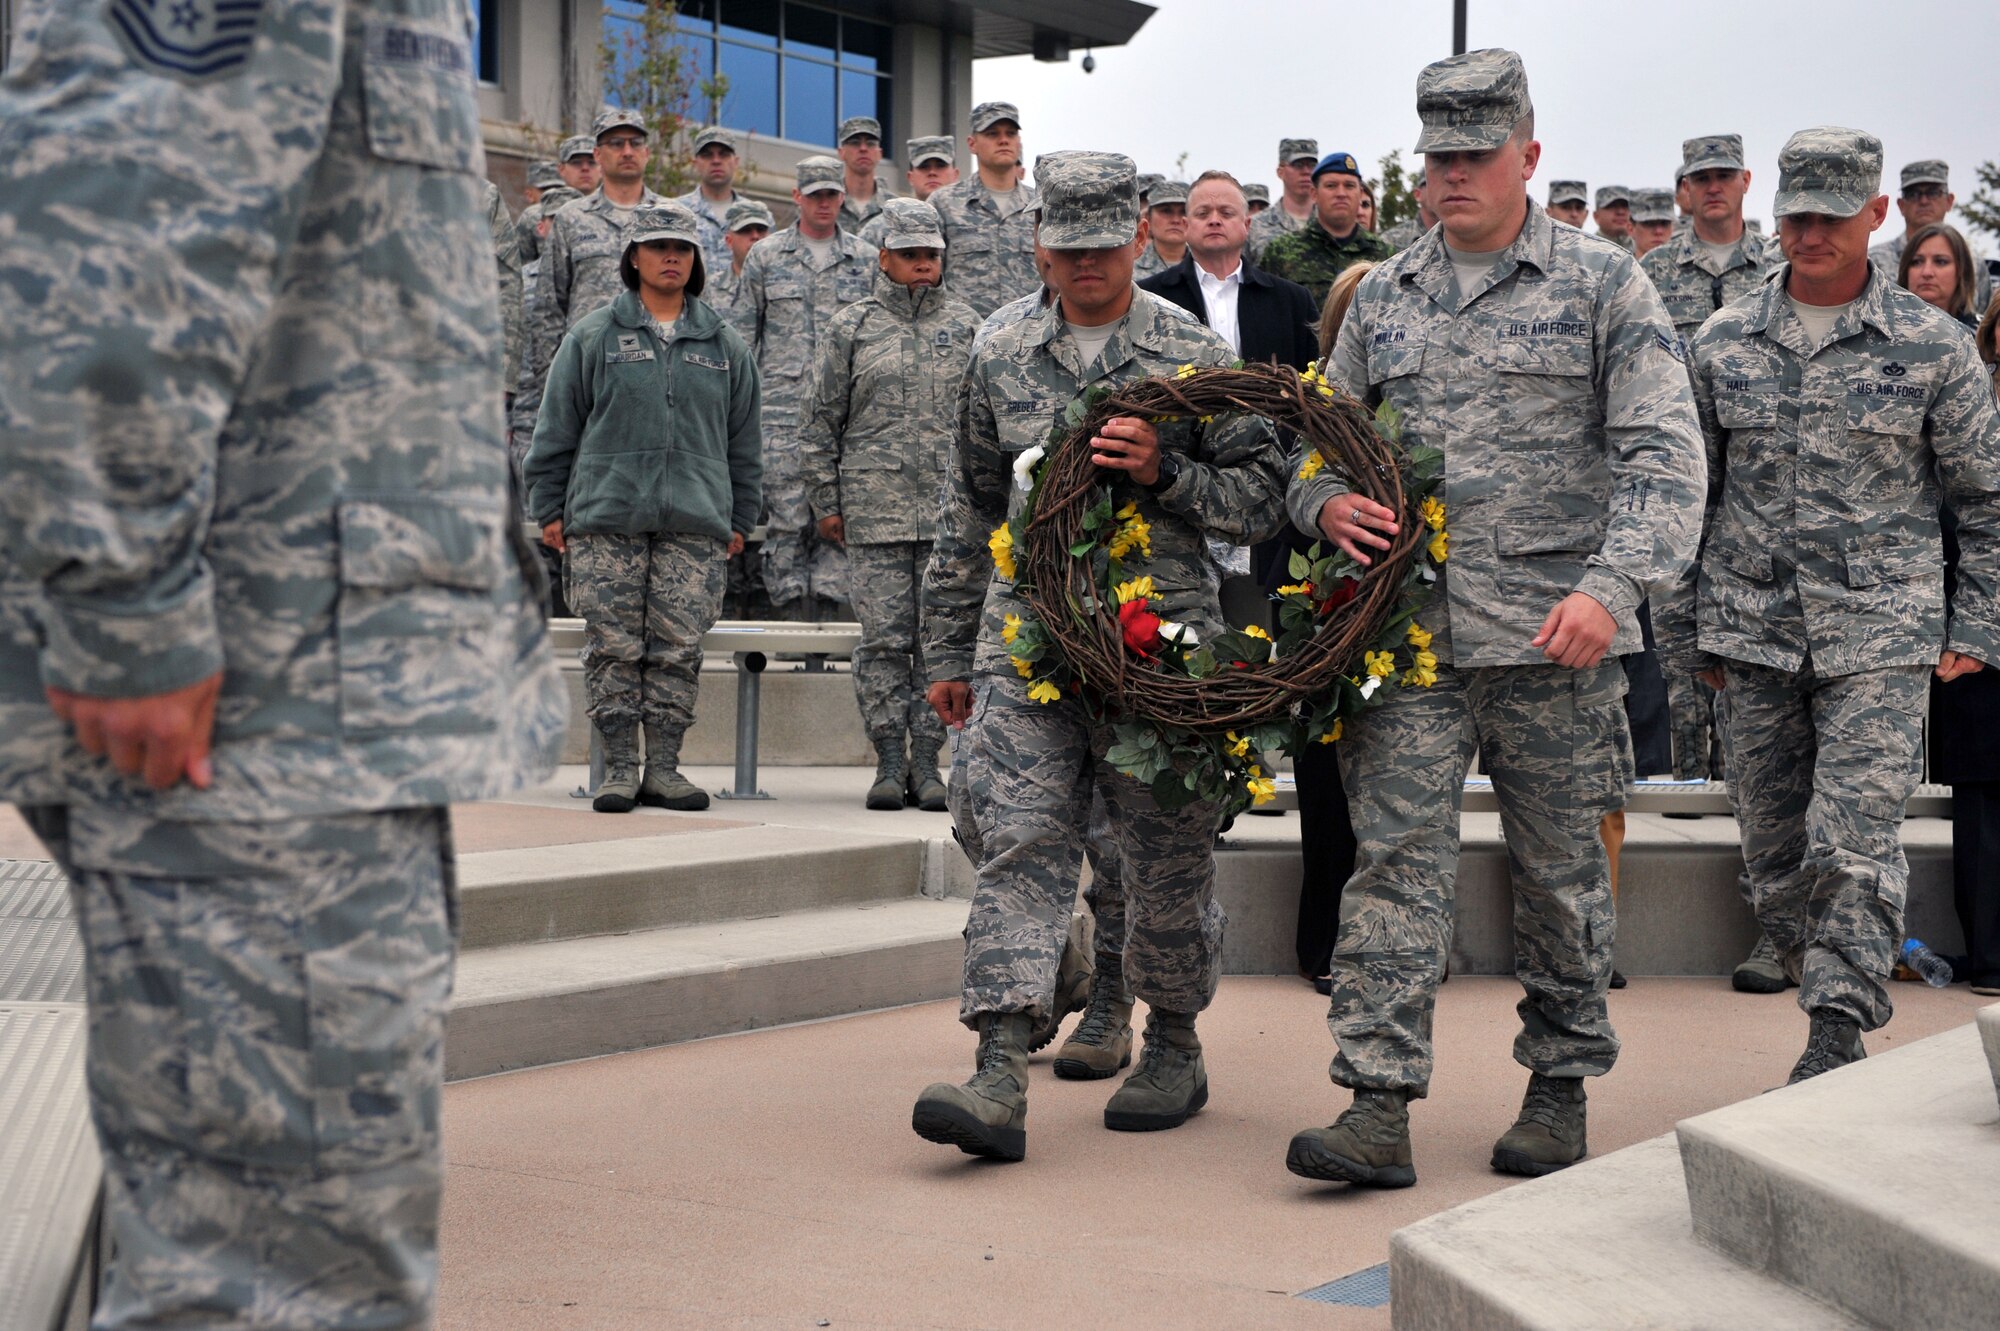 Airman 1st Class Ryan Mullen, 460th Operations Group administrator, right, and Senior Airman Matthew Greger, 2nd Space Warning Squadron, left, present the wreath during the Patriot Day retreat ceremony Sept. 11, 2014, on Buckley Air Force Base, Colo. Patriot Day is the national day of service and remembrance, in memory of the thousands killed on U.S. soil in the 9/11 attacks. (U.S. Air Force Photo by Airman Emily E. Amyotte/Released)